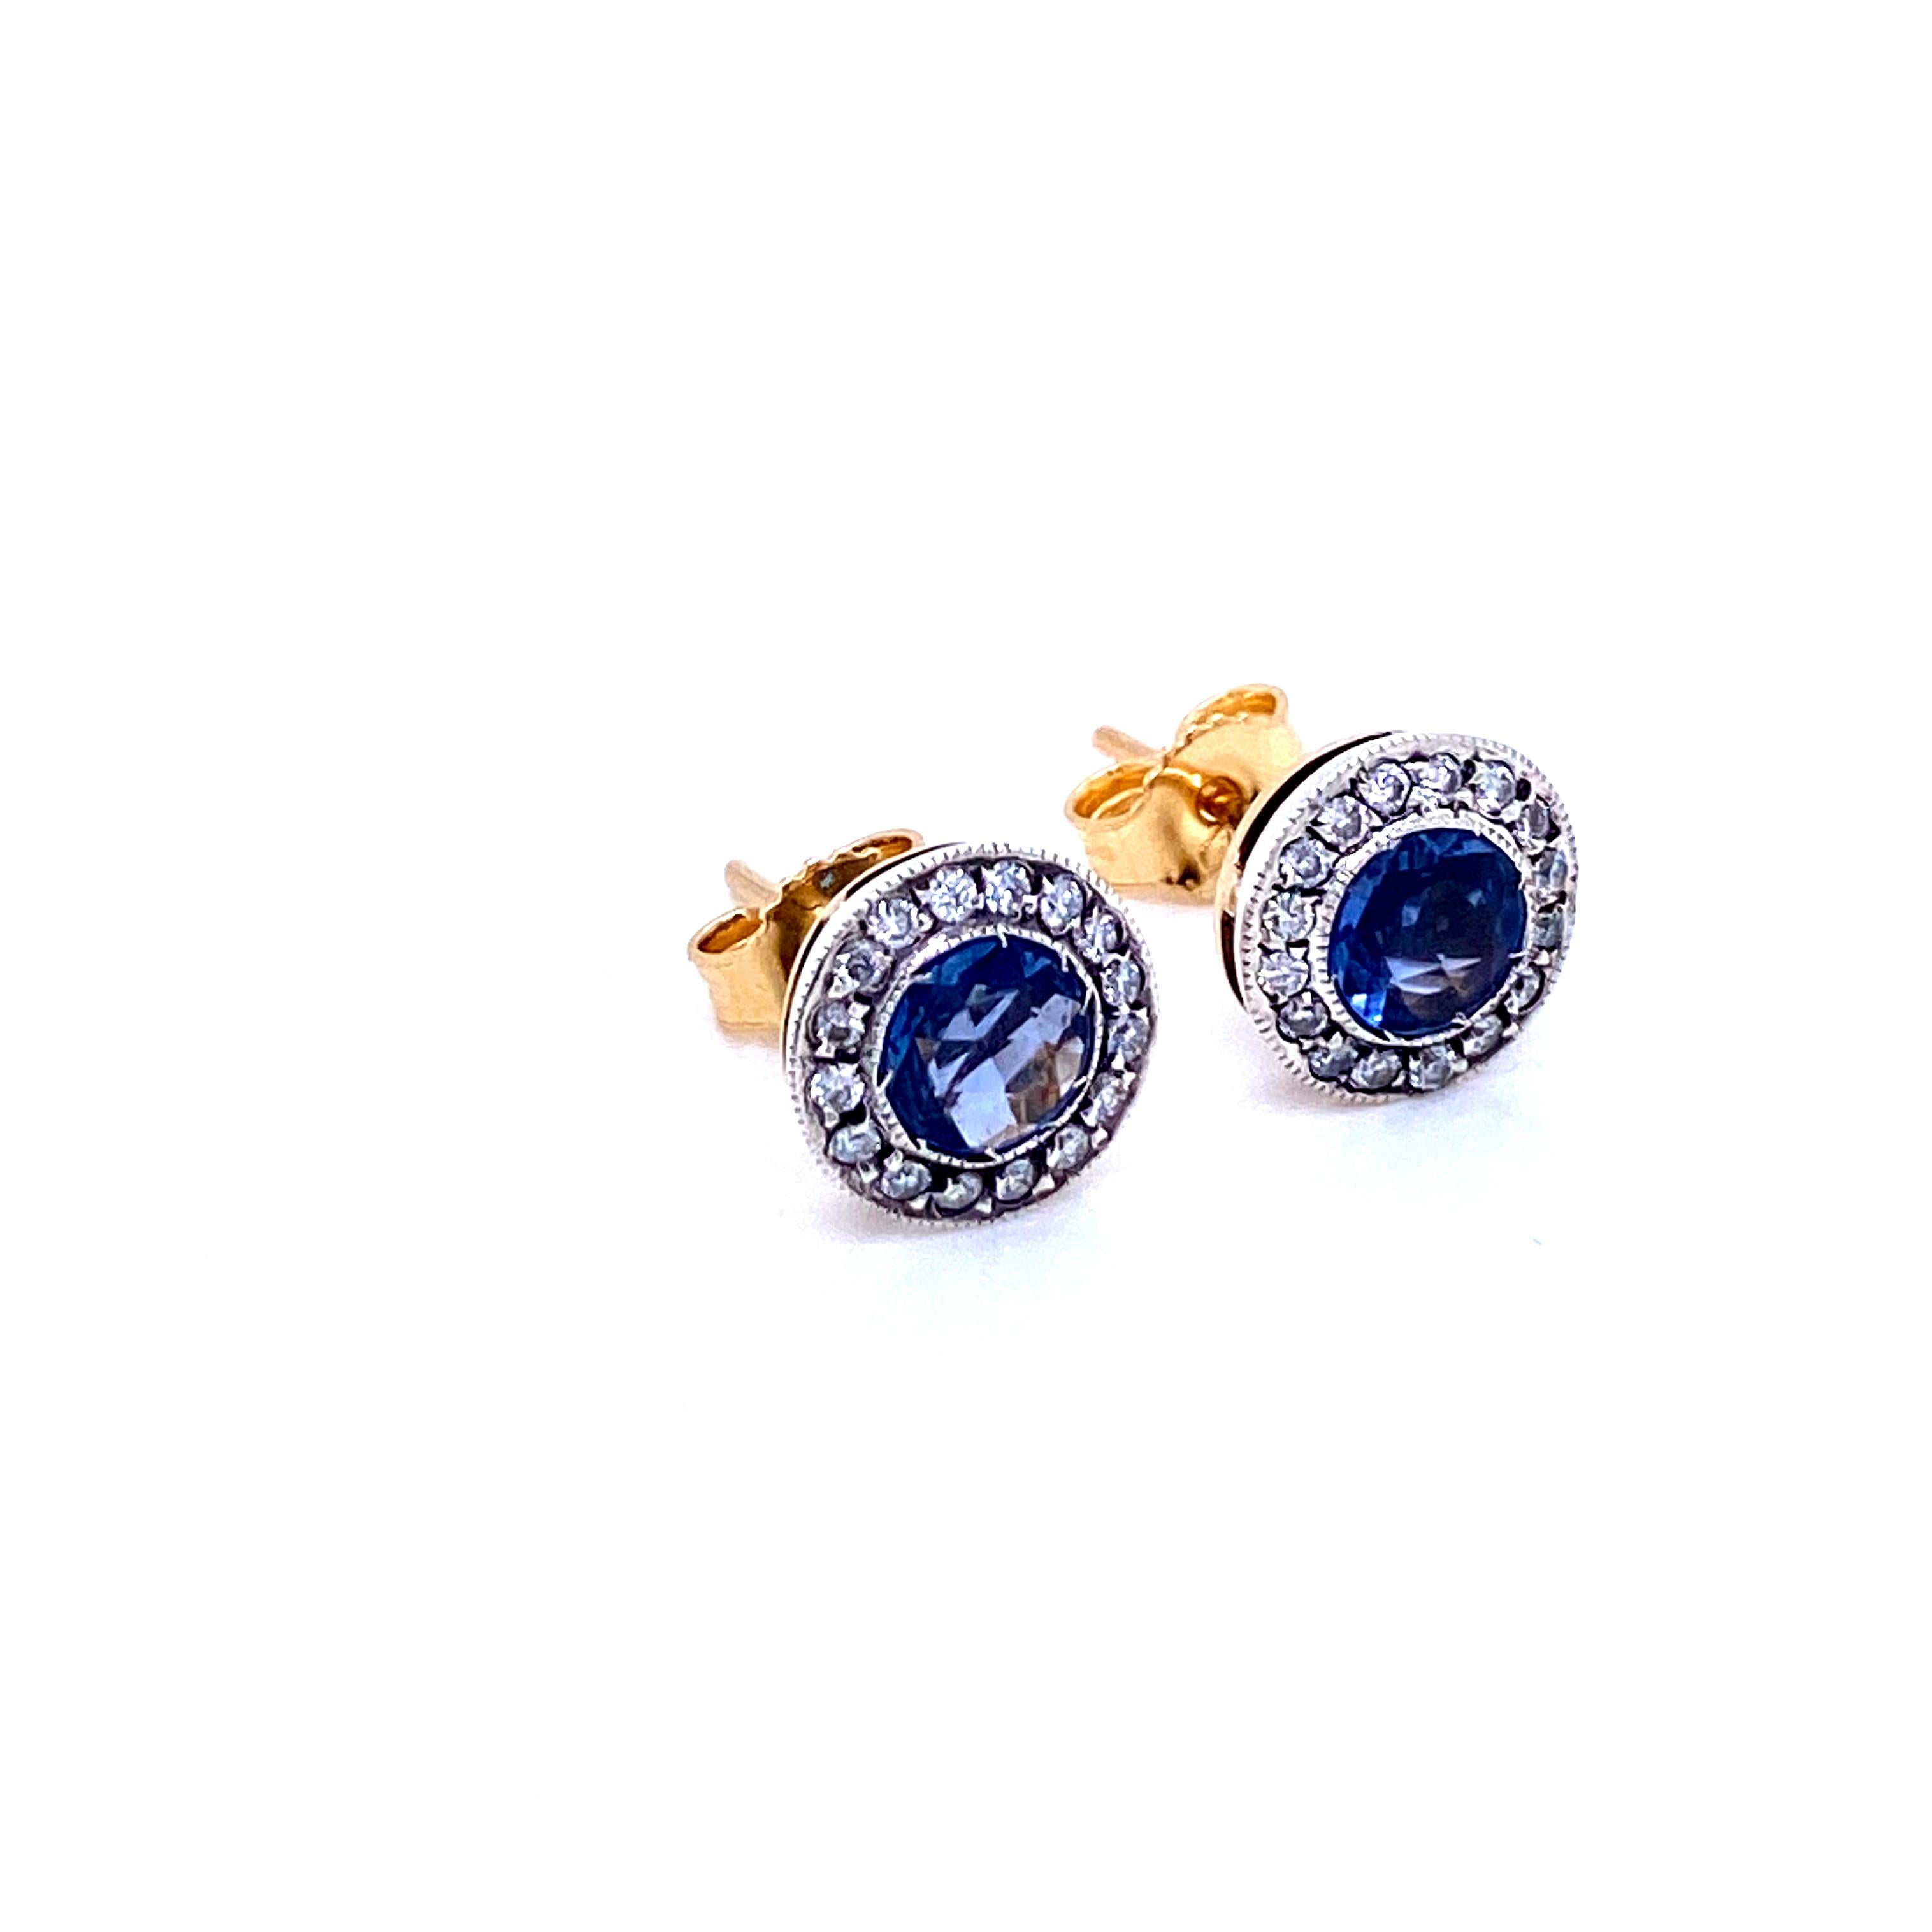 These exquisite stud earrings are adorned at the center with 2 Natural Sapphires. .50 ct. each and surrounded by round cut Diamond having a total weight of .36 carats. Handcrafted in 18k yellow Gold and silver. Circa 1930

CONDITION: Pre-owned -